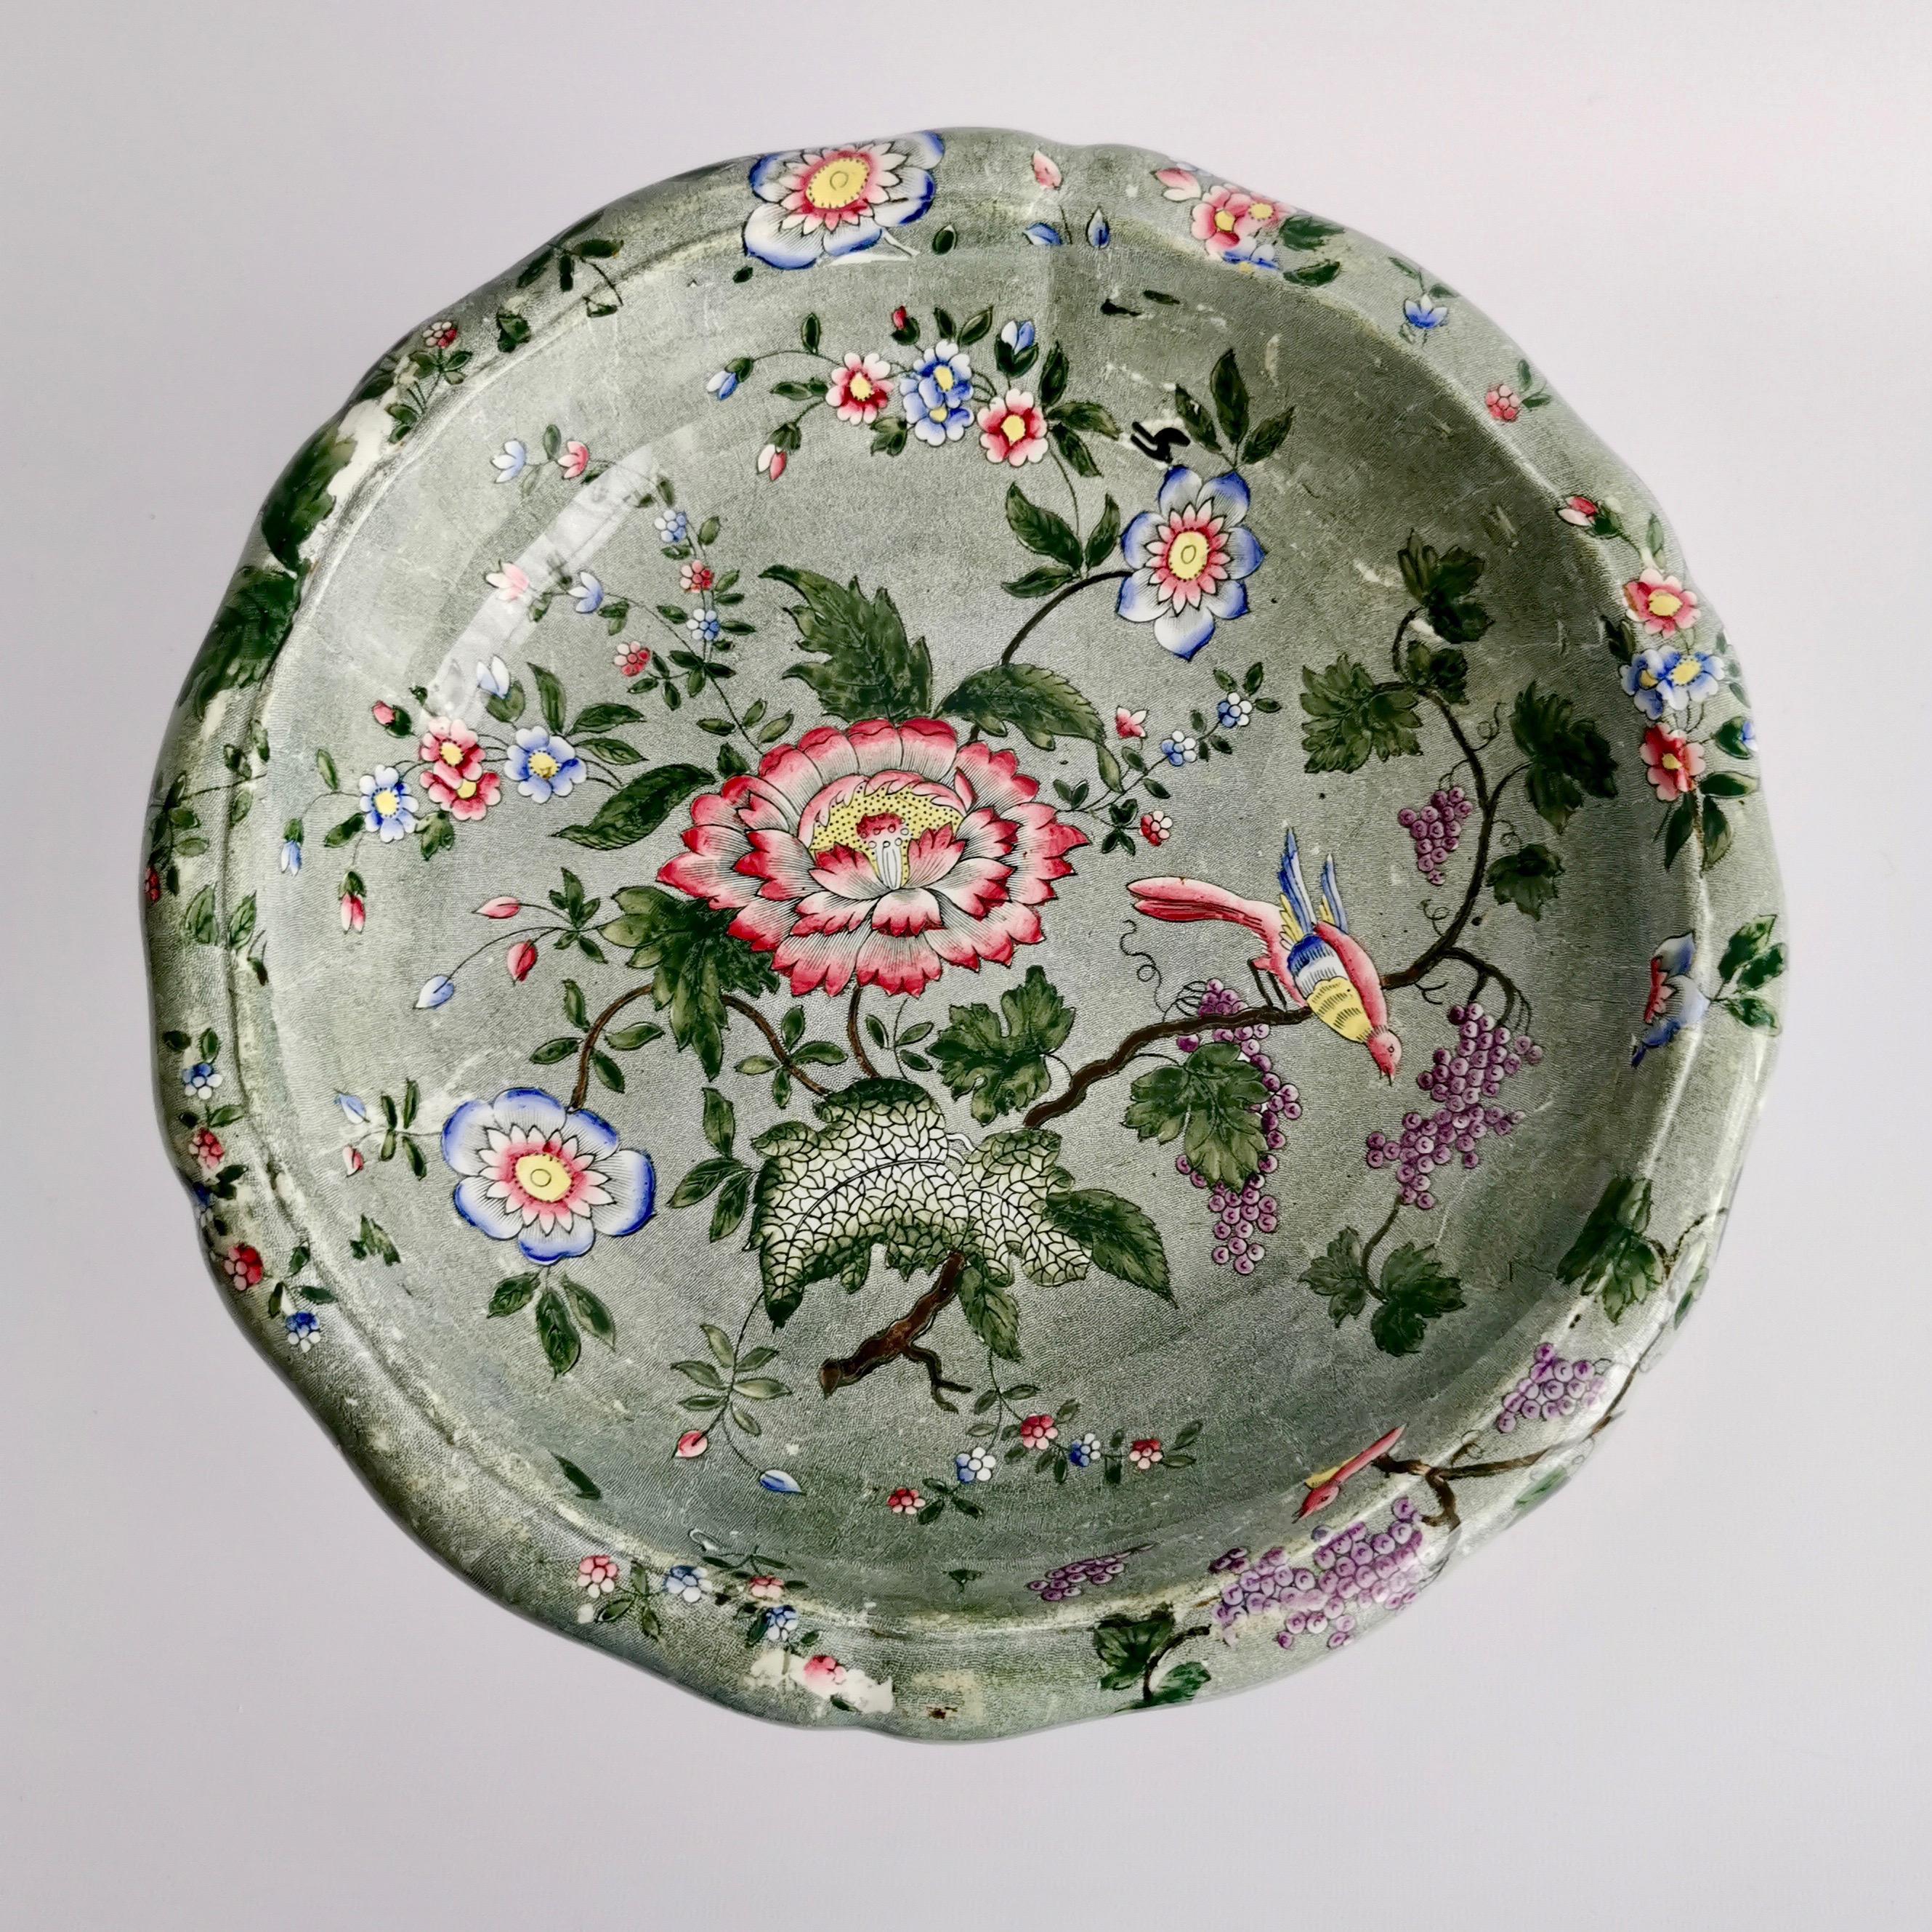 English Spode's New Fayence Tazza, Green Chinoiserie Flowers and Birds, Regency, 1829